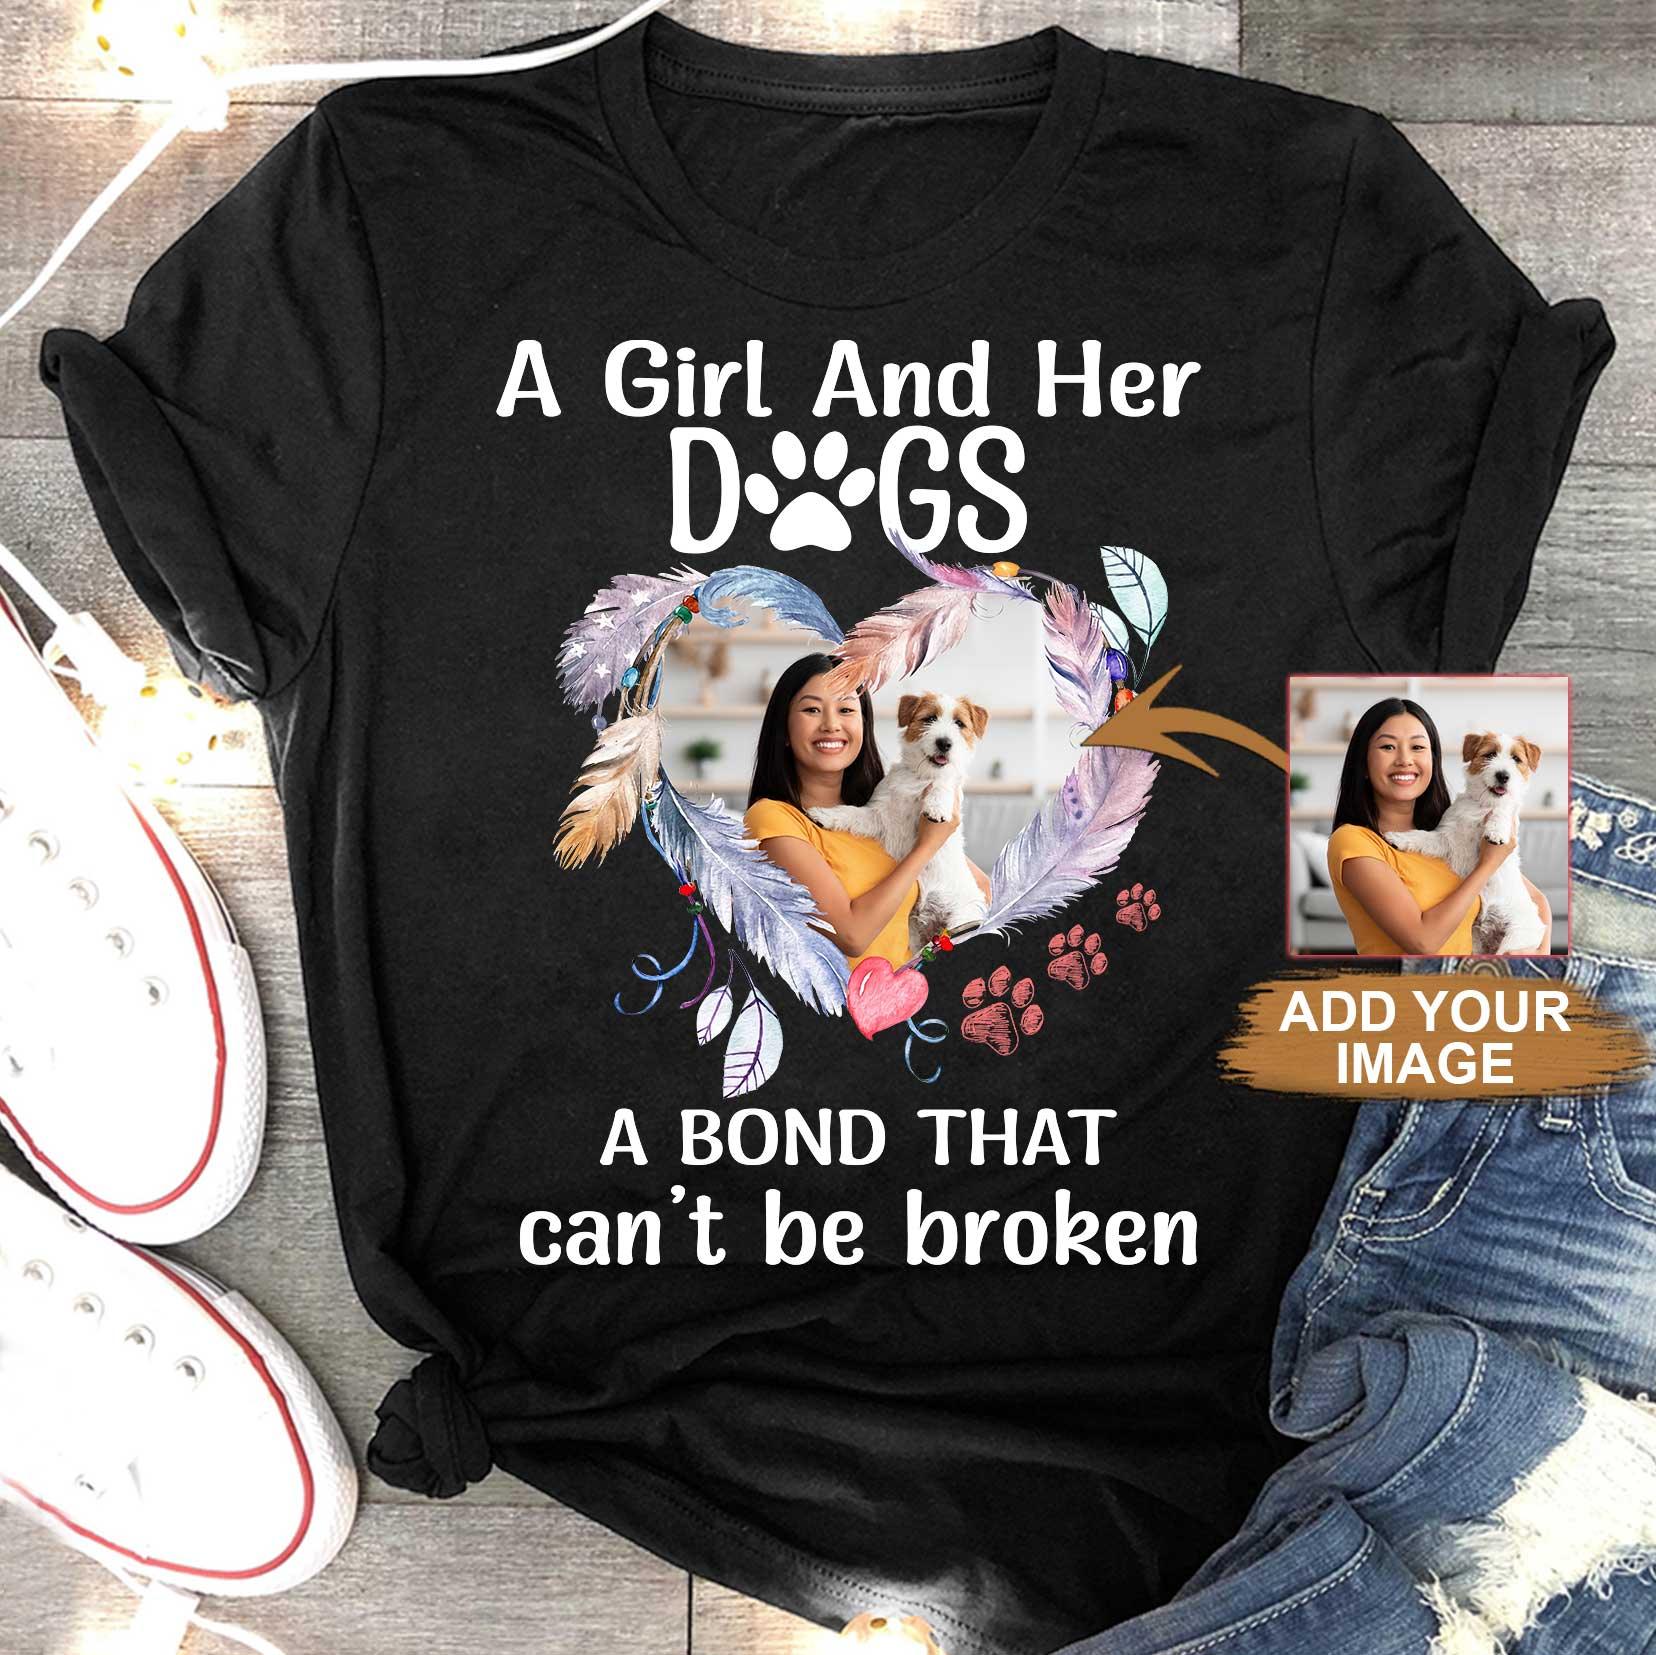 Custom Pet Dog Unisex T Shirt - Customize Photo A Girl And Her Dogs Personalized Unisex T Shirt - Gift For Dog Lovers, Friend, Family - Amzanimalsgift